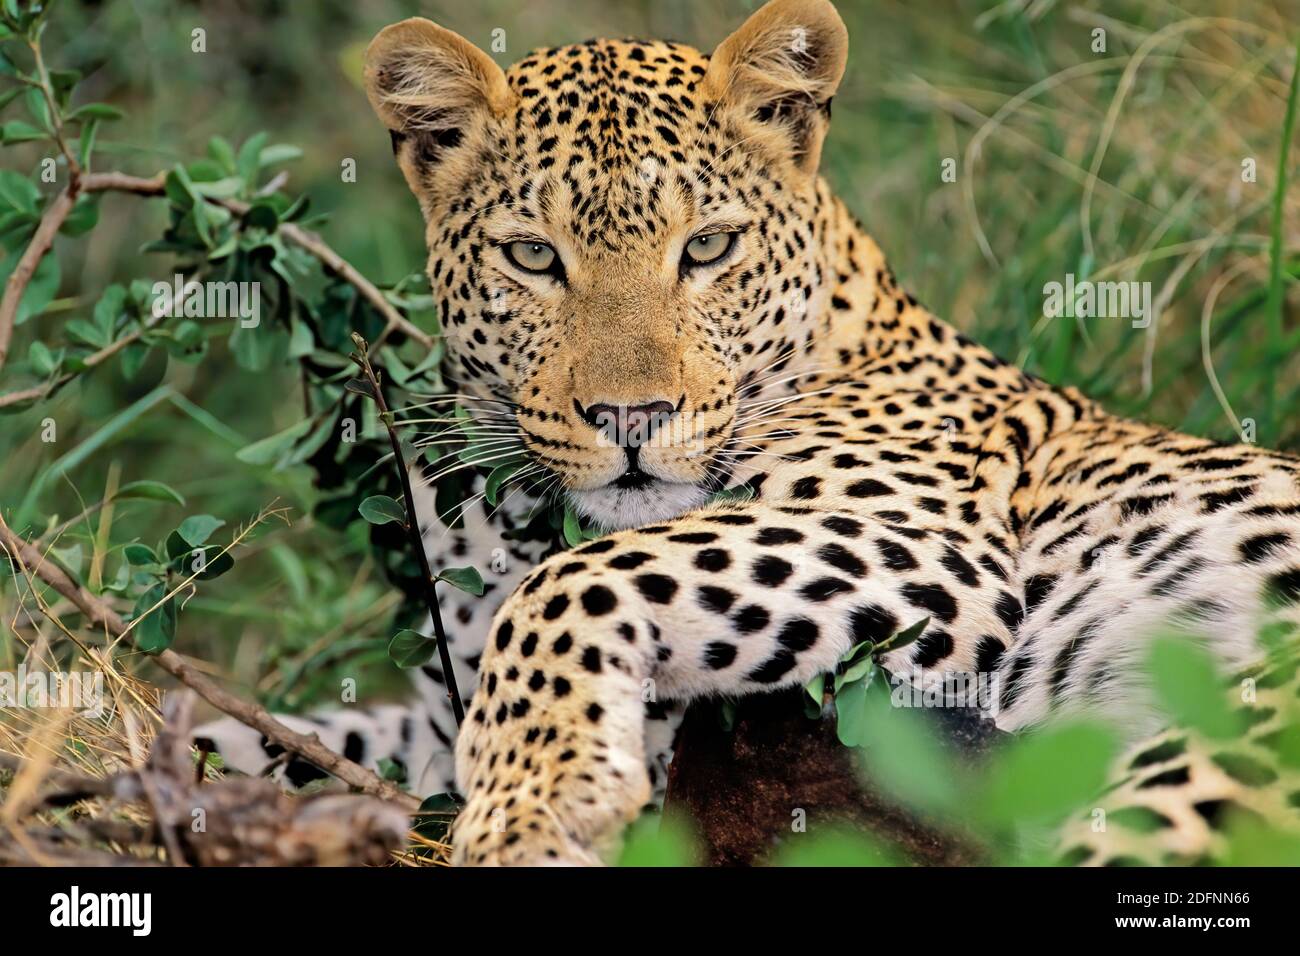 A leopard (Panthera pardus) resting in natural habitat, South Africa Stock Photo